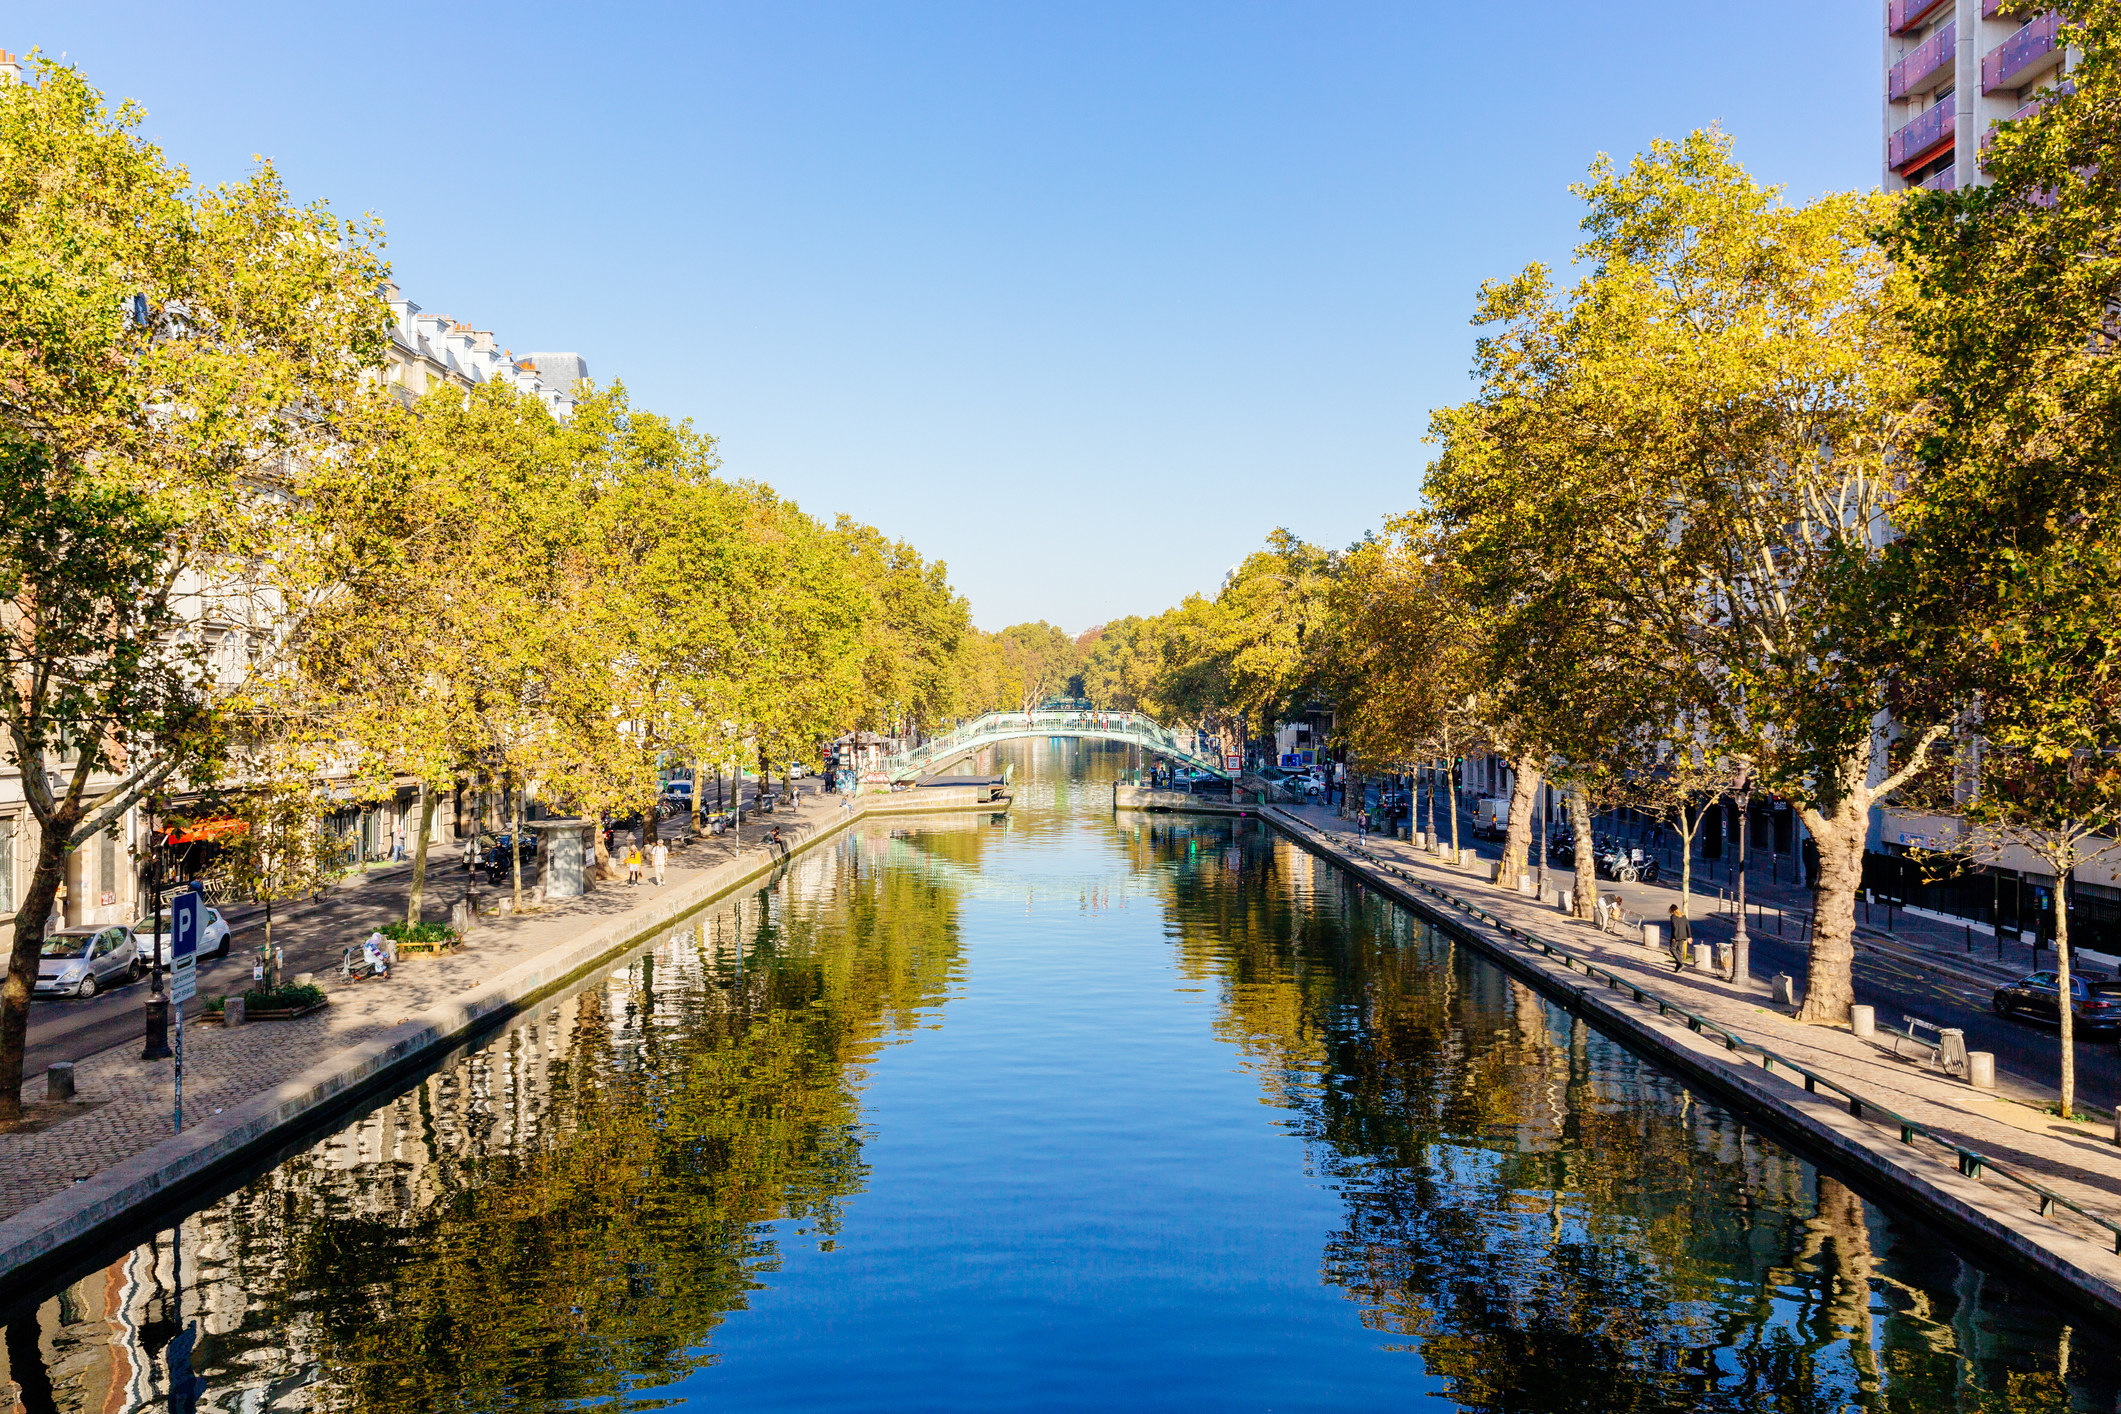 A quiet neighborhood by a canal in Paris.